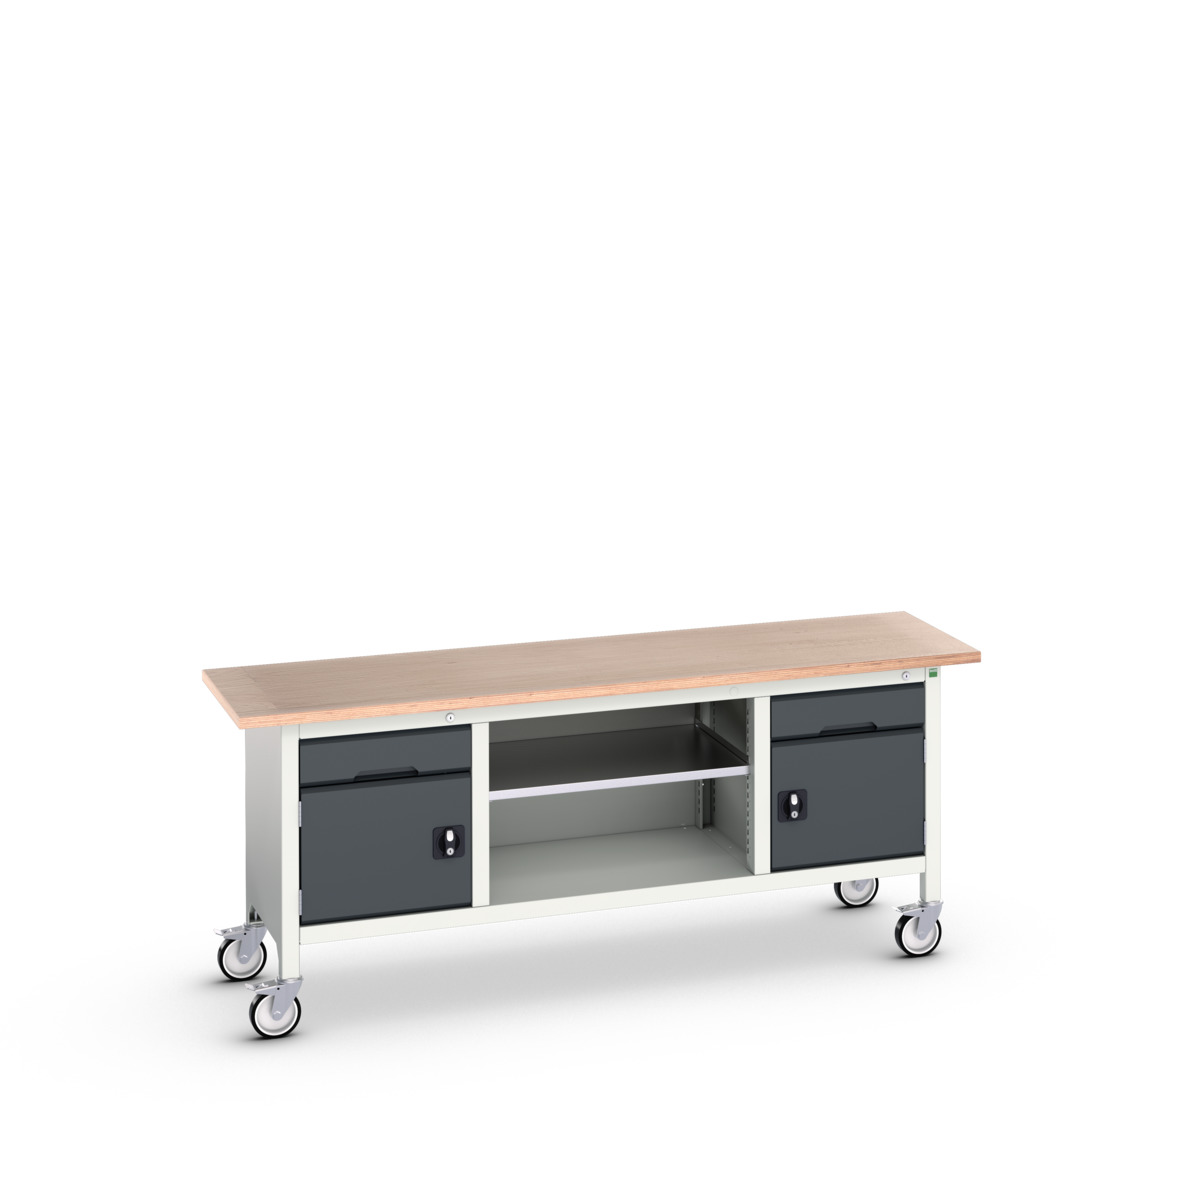 16923231.19 - verso mobile storage bench (mpx)